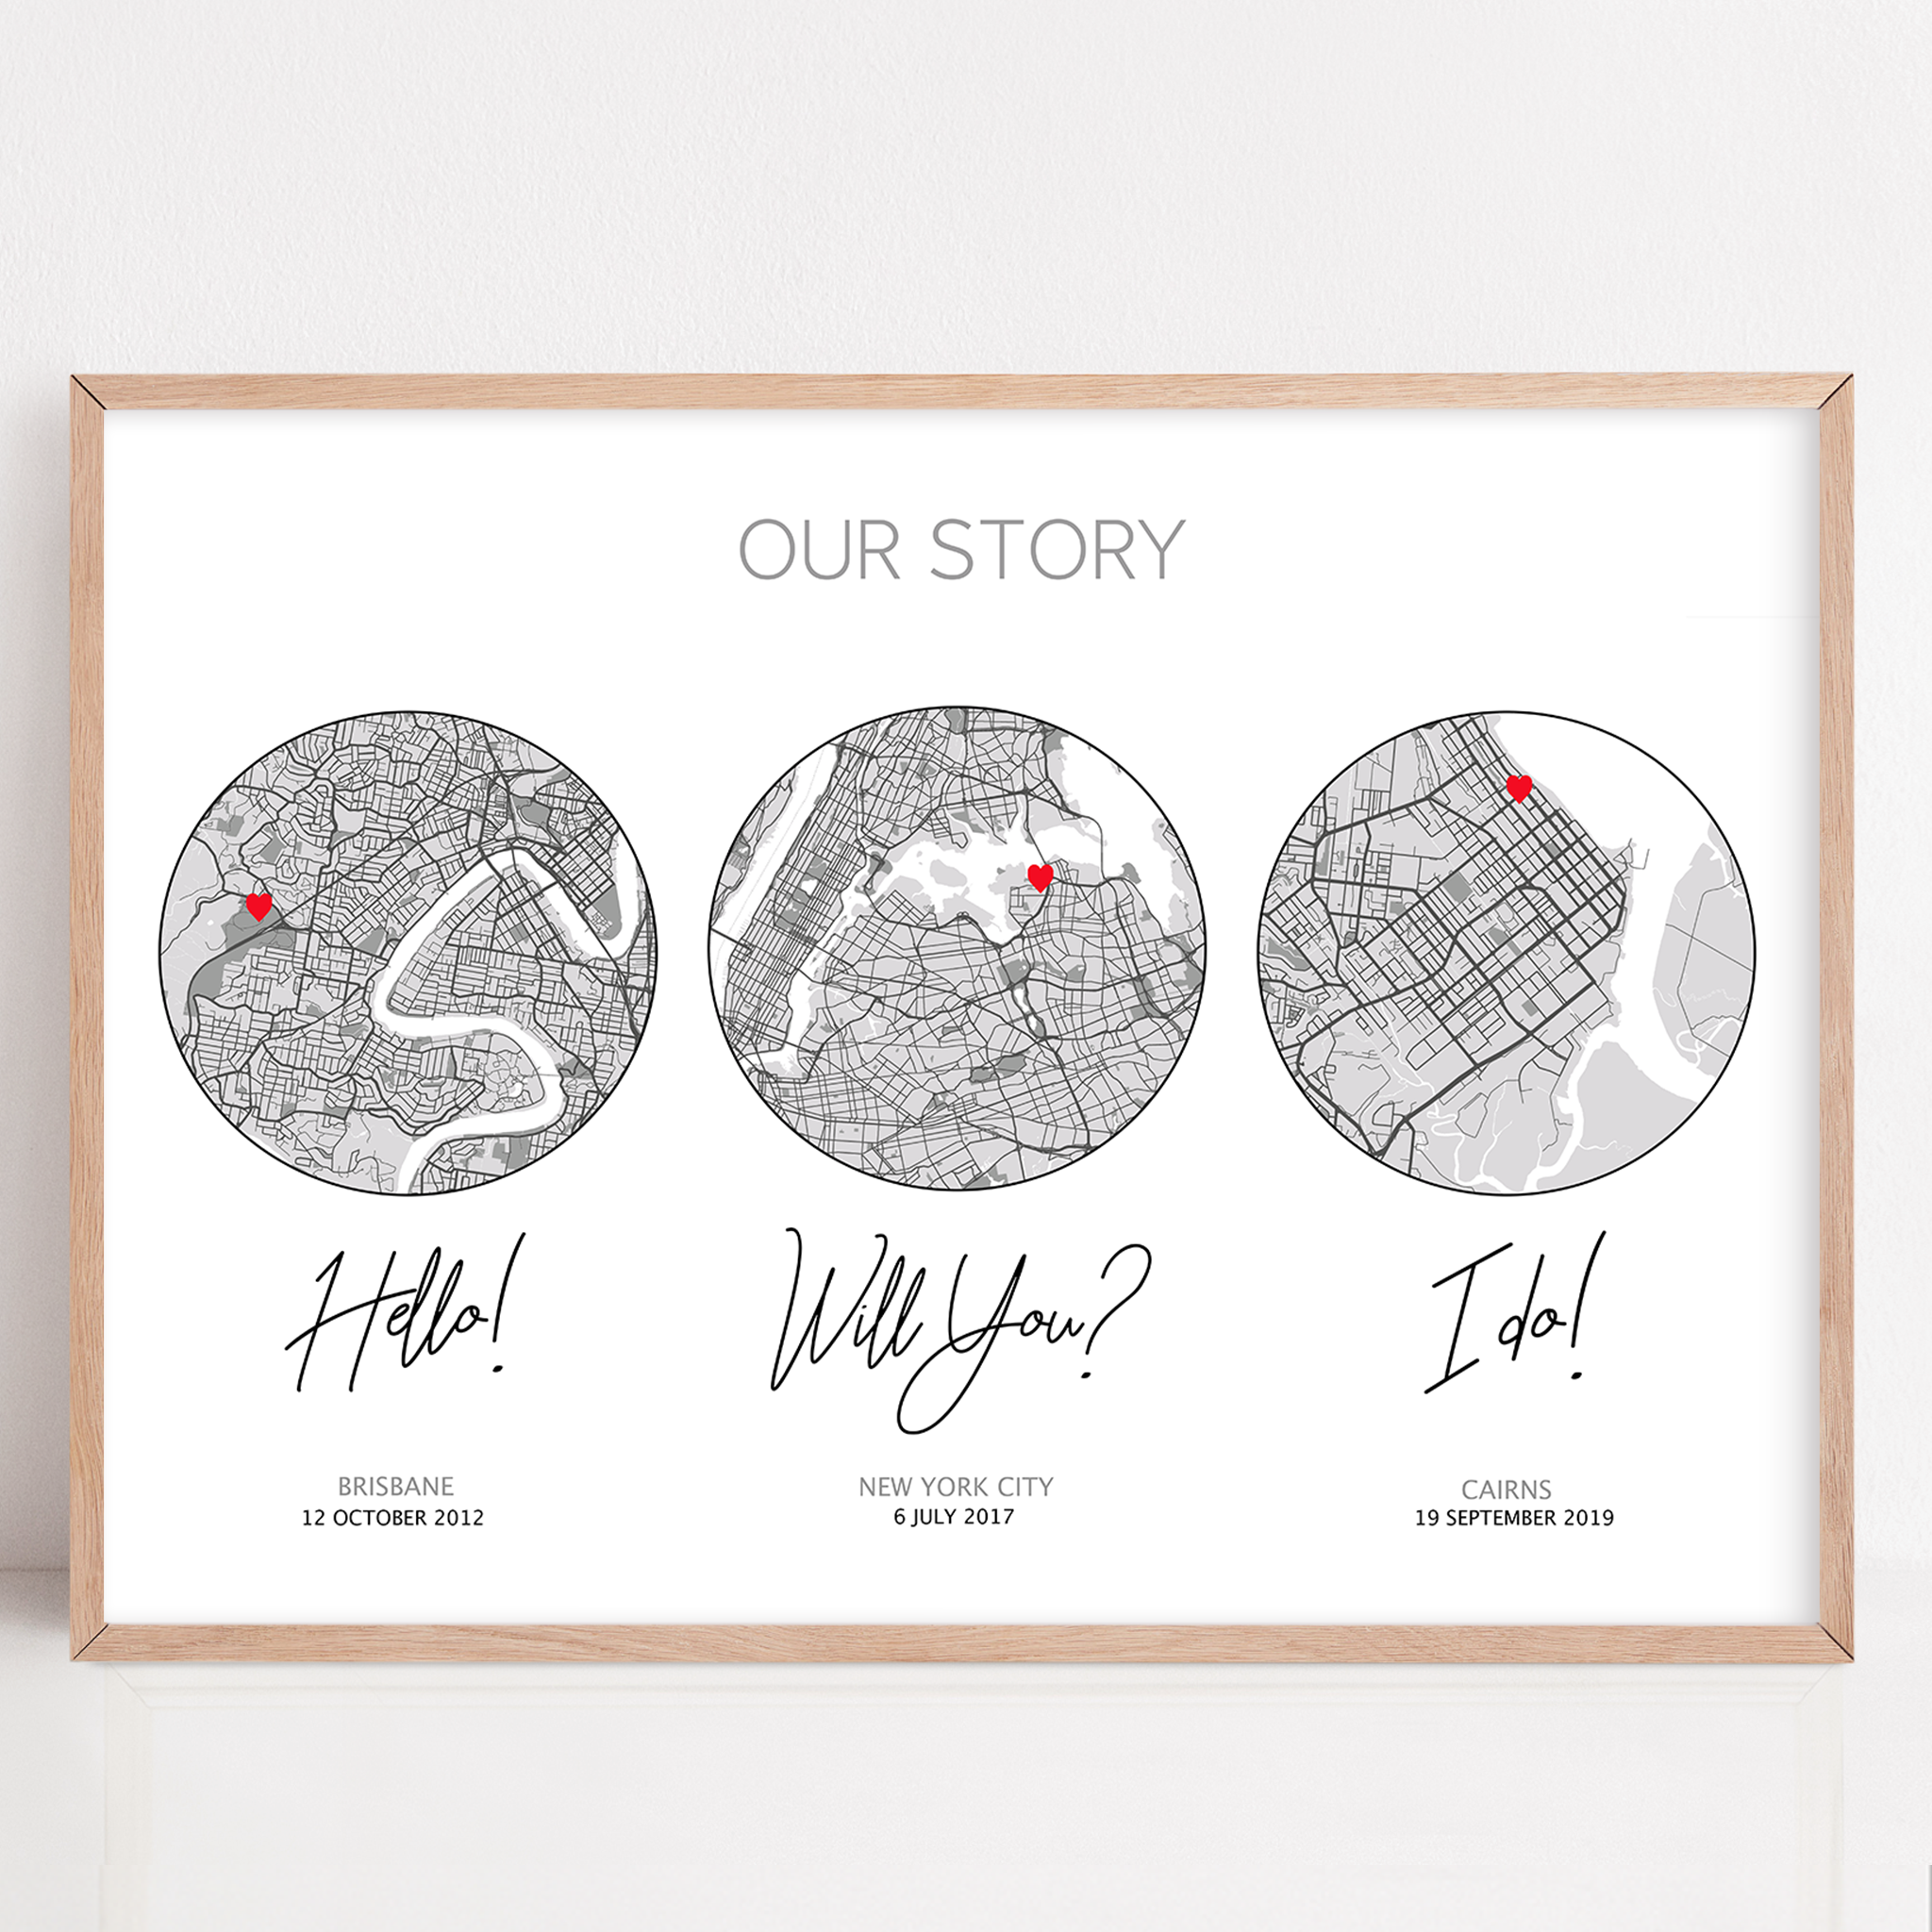 our story paper anniversary gift framed print of when you met, engaged and married